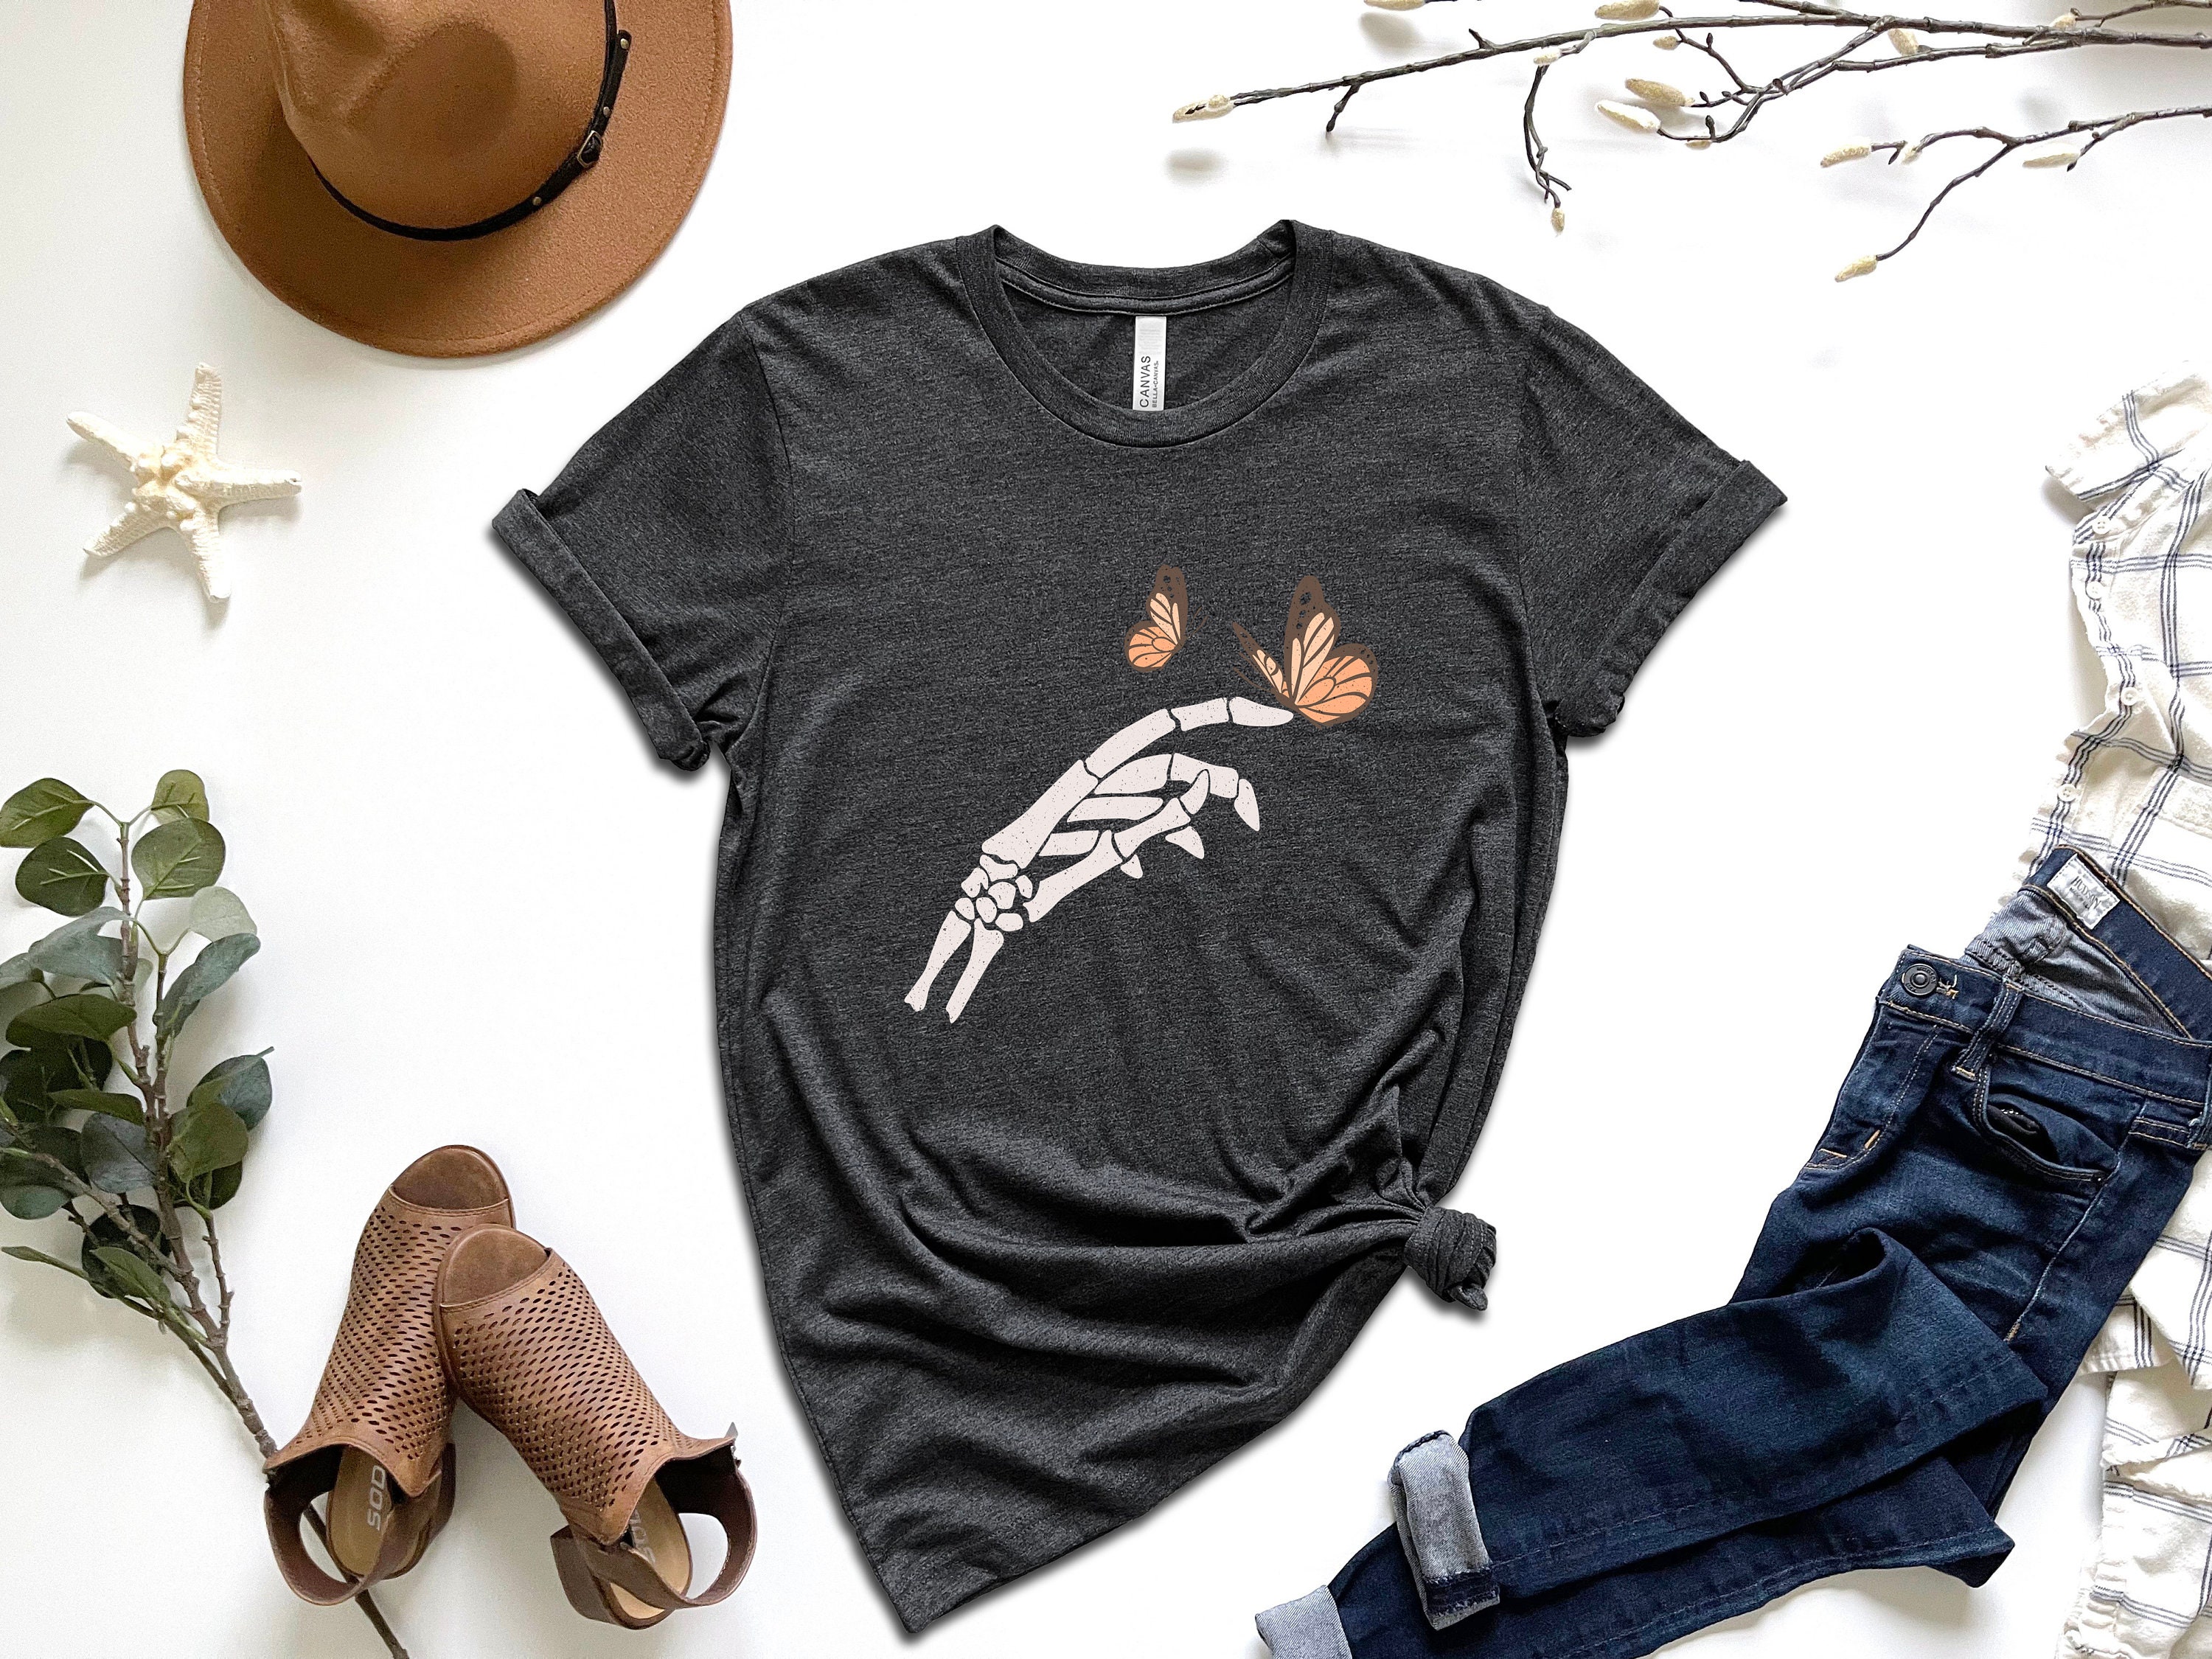 Discover Floral Butterfly Skeleton Hand T-shirt, Butterfly Shirt, Skeleton Shirt, Skeleton Hand Tee, Floral Shirt, Trendy Shirt, Ladies Funny Shirt